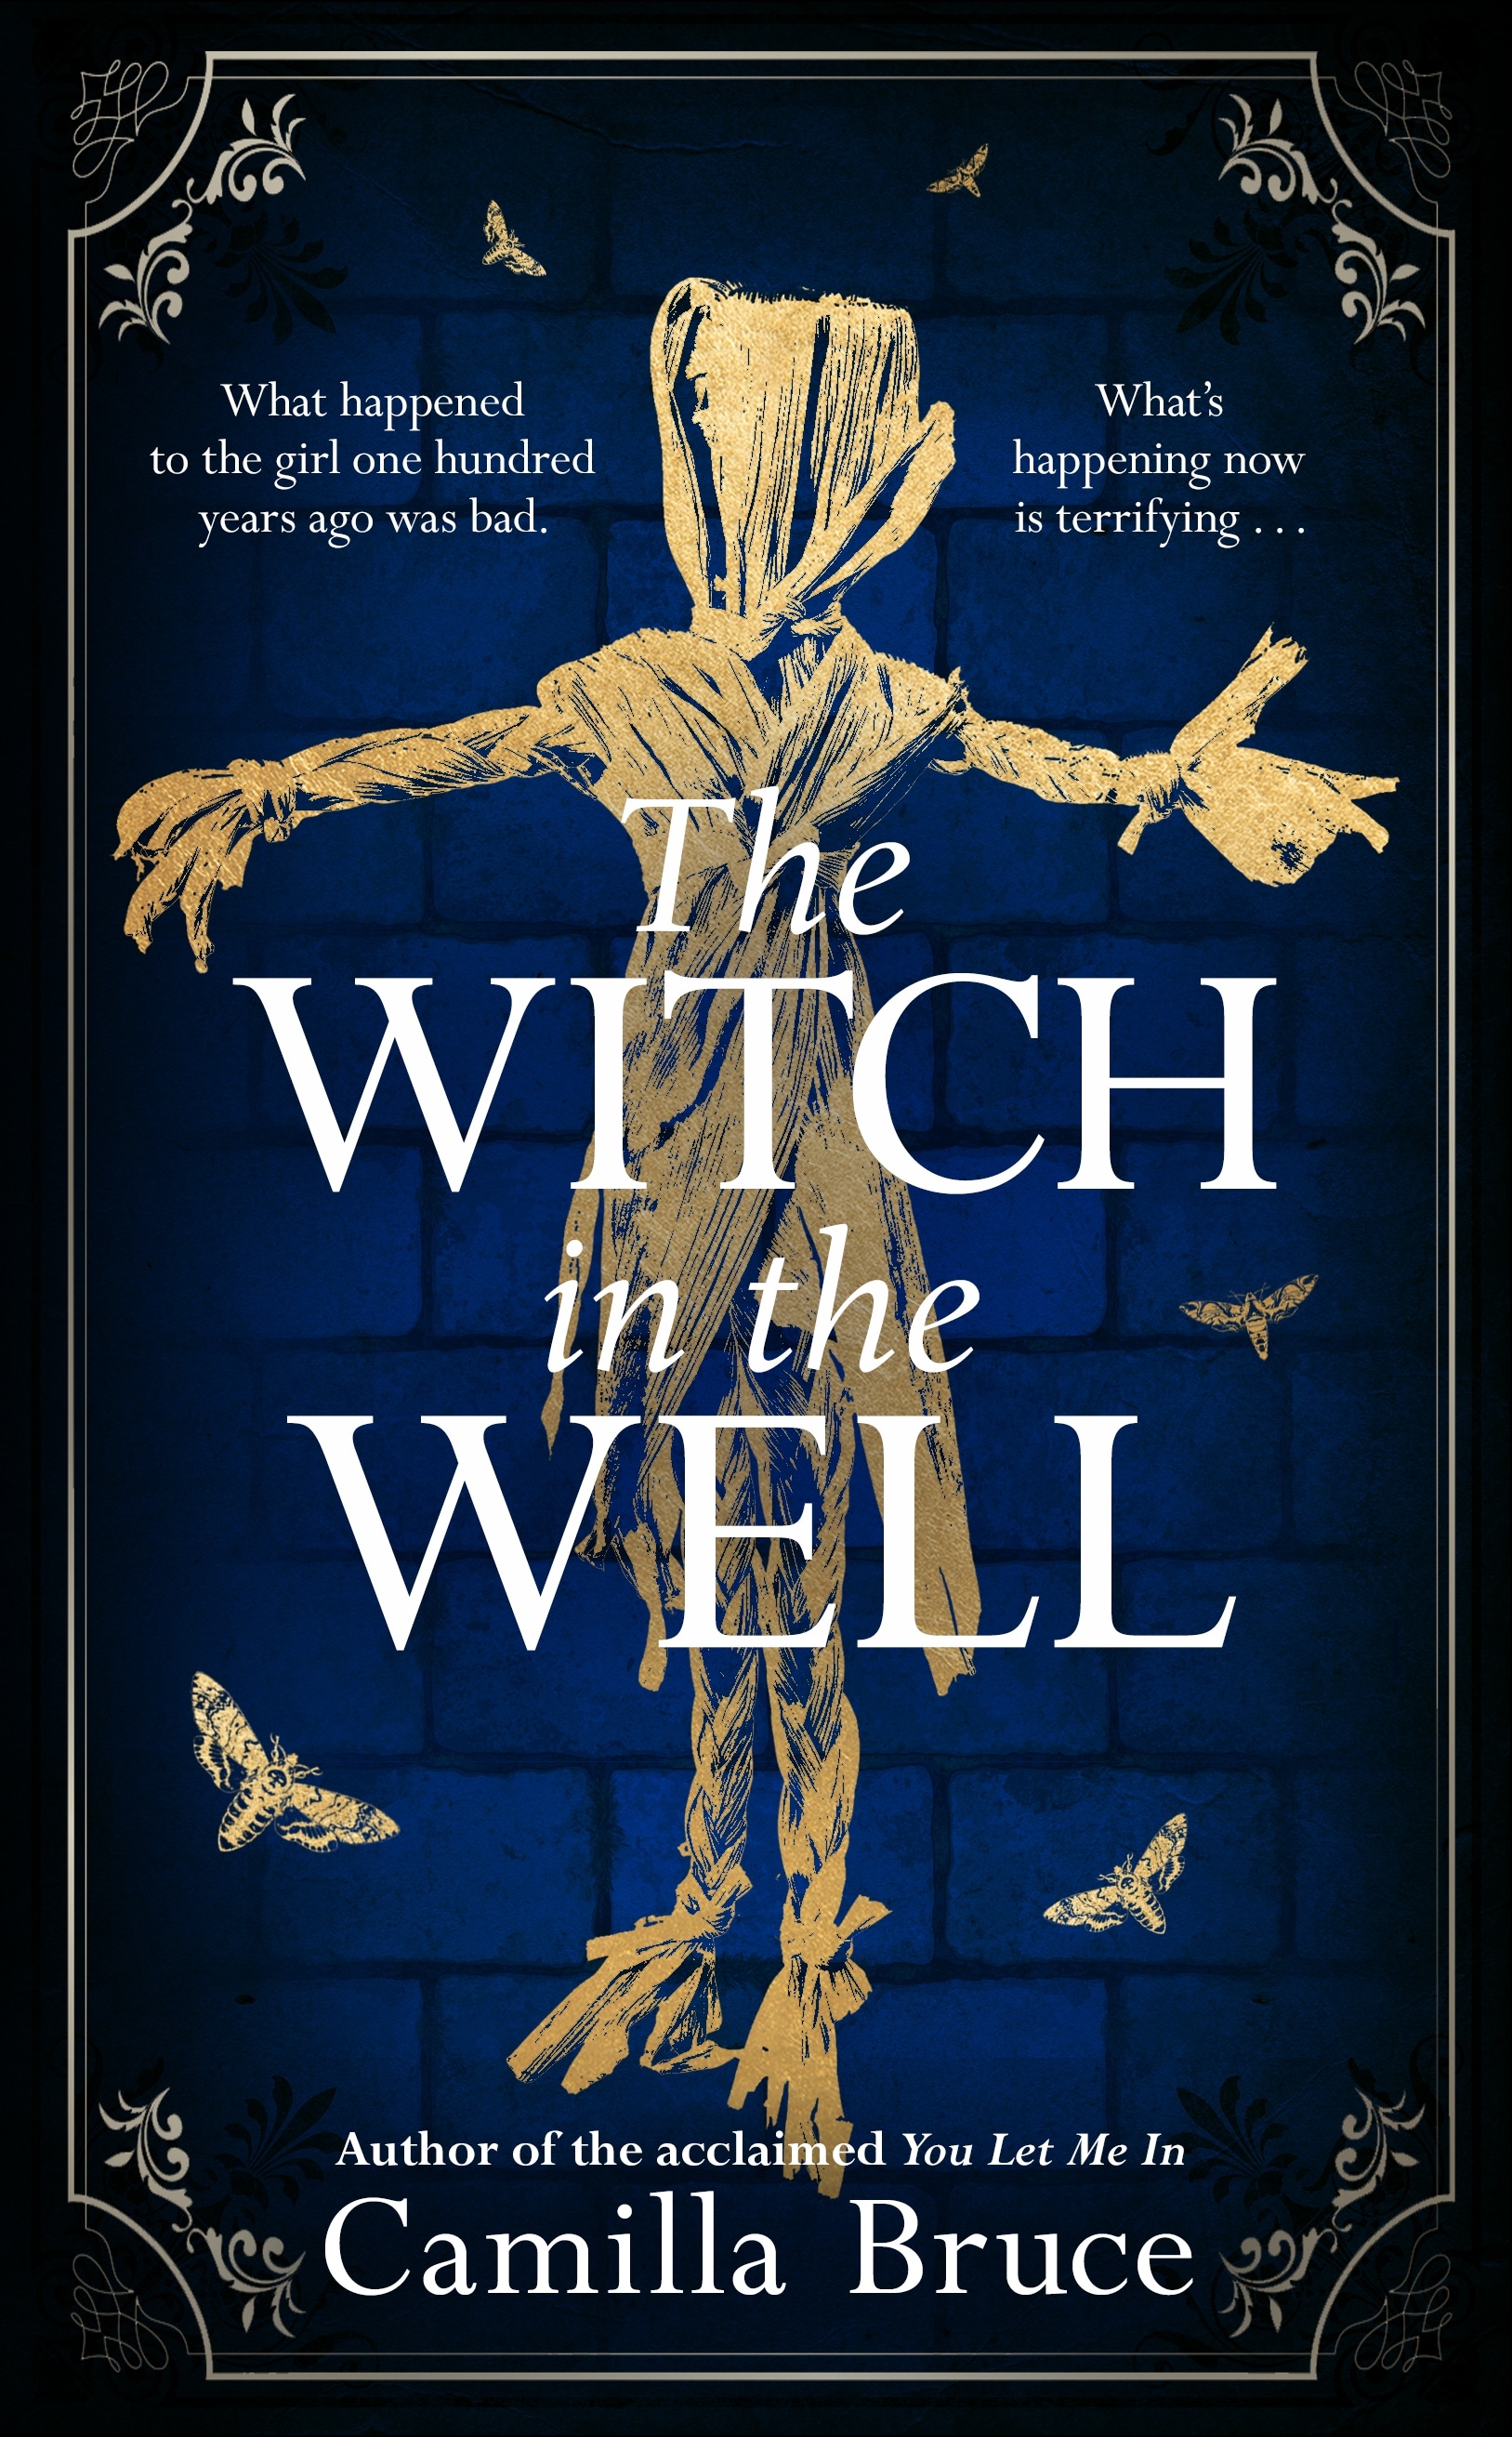 Book “The Witch in the Well” by Camilla Bruce — September 8, 2022